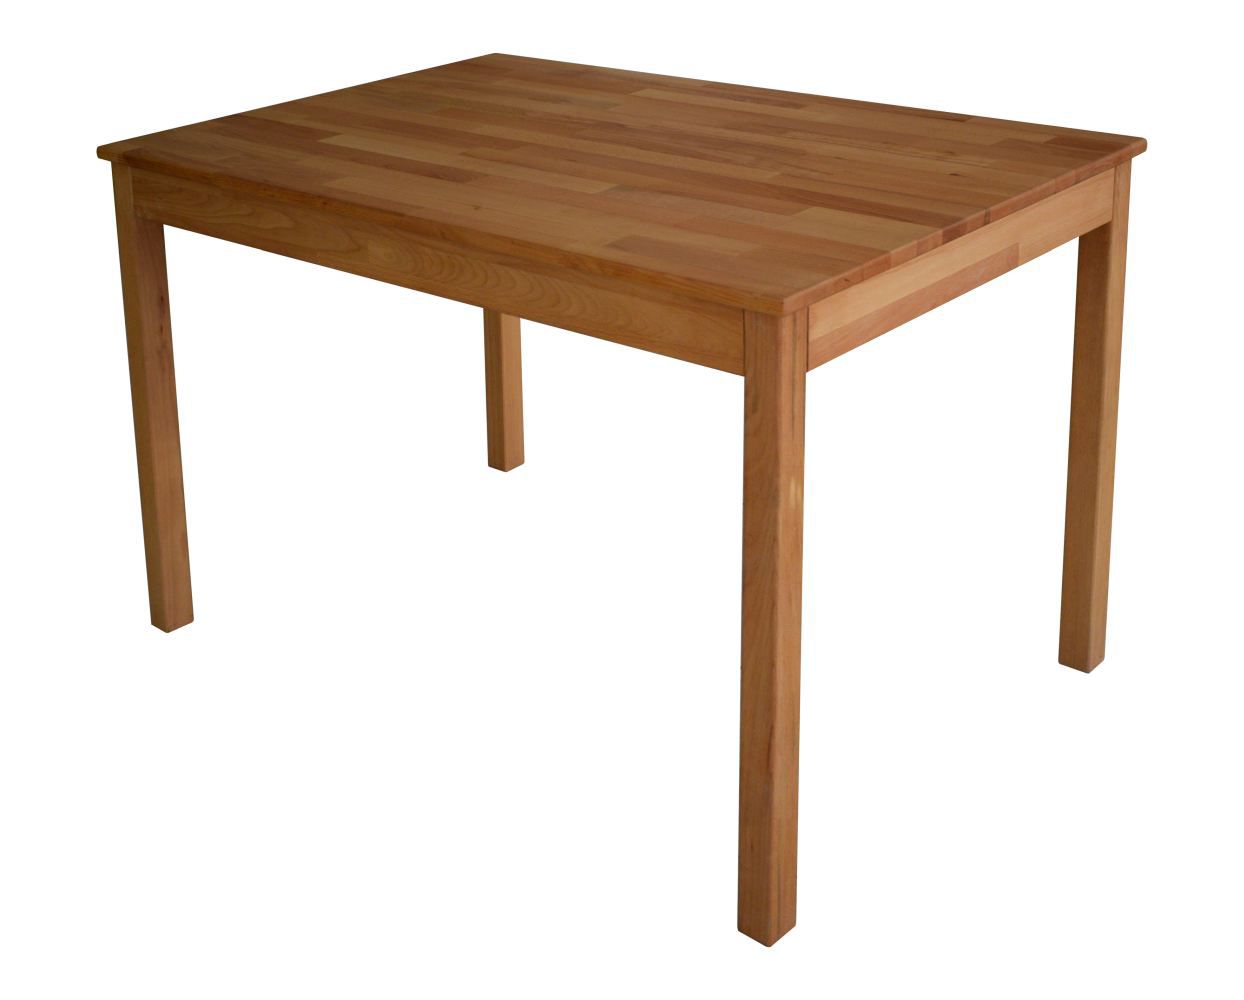 Small dining table Wooden Nature 205 solid beech Natural oiled - Measurements: 110 x 70 cm (W x D)